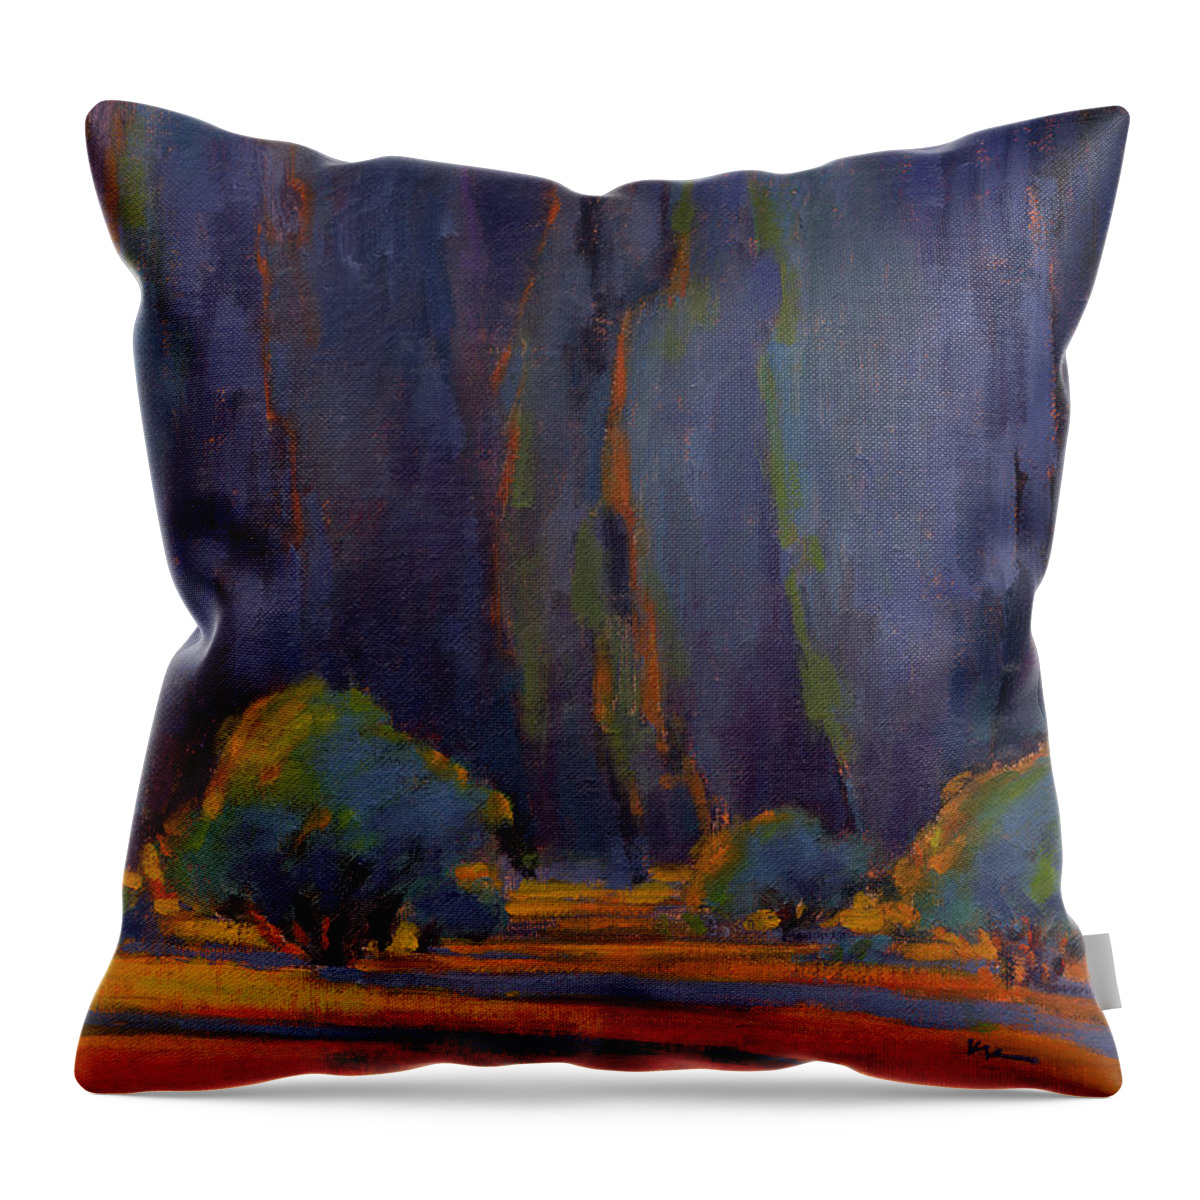 Landscape Throw Pillow featuring the painting Beckoning by Konnie Kim